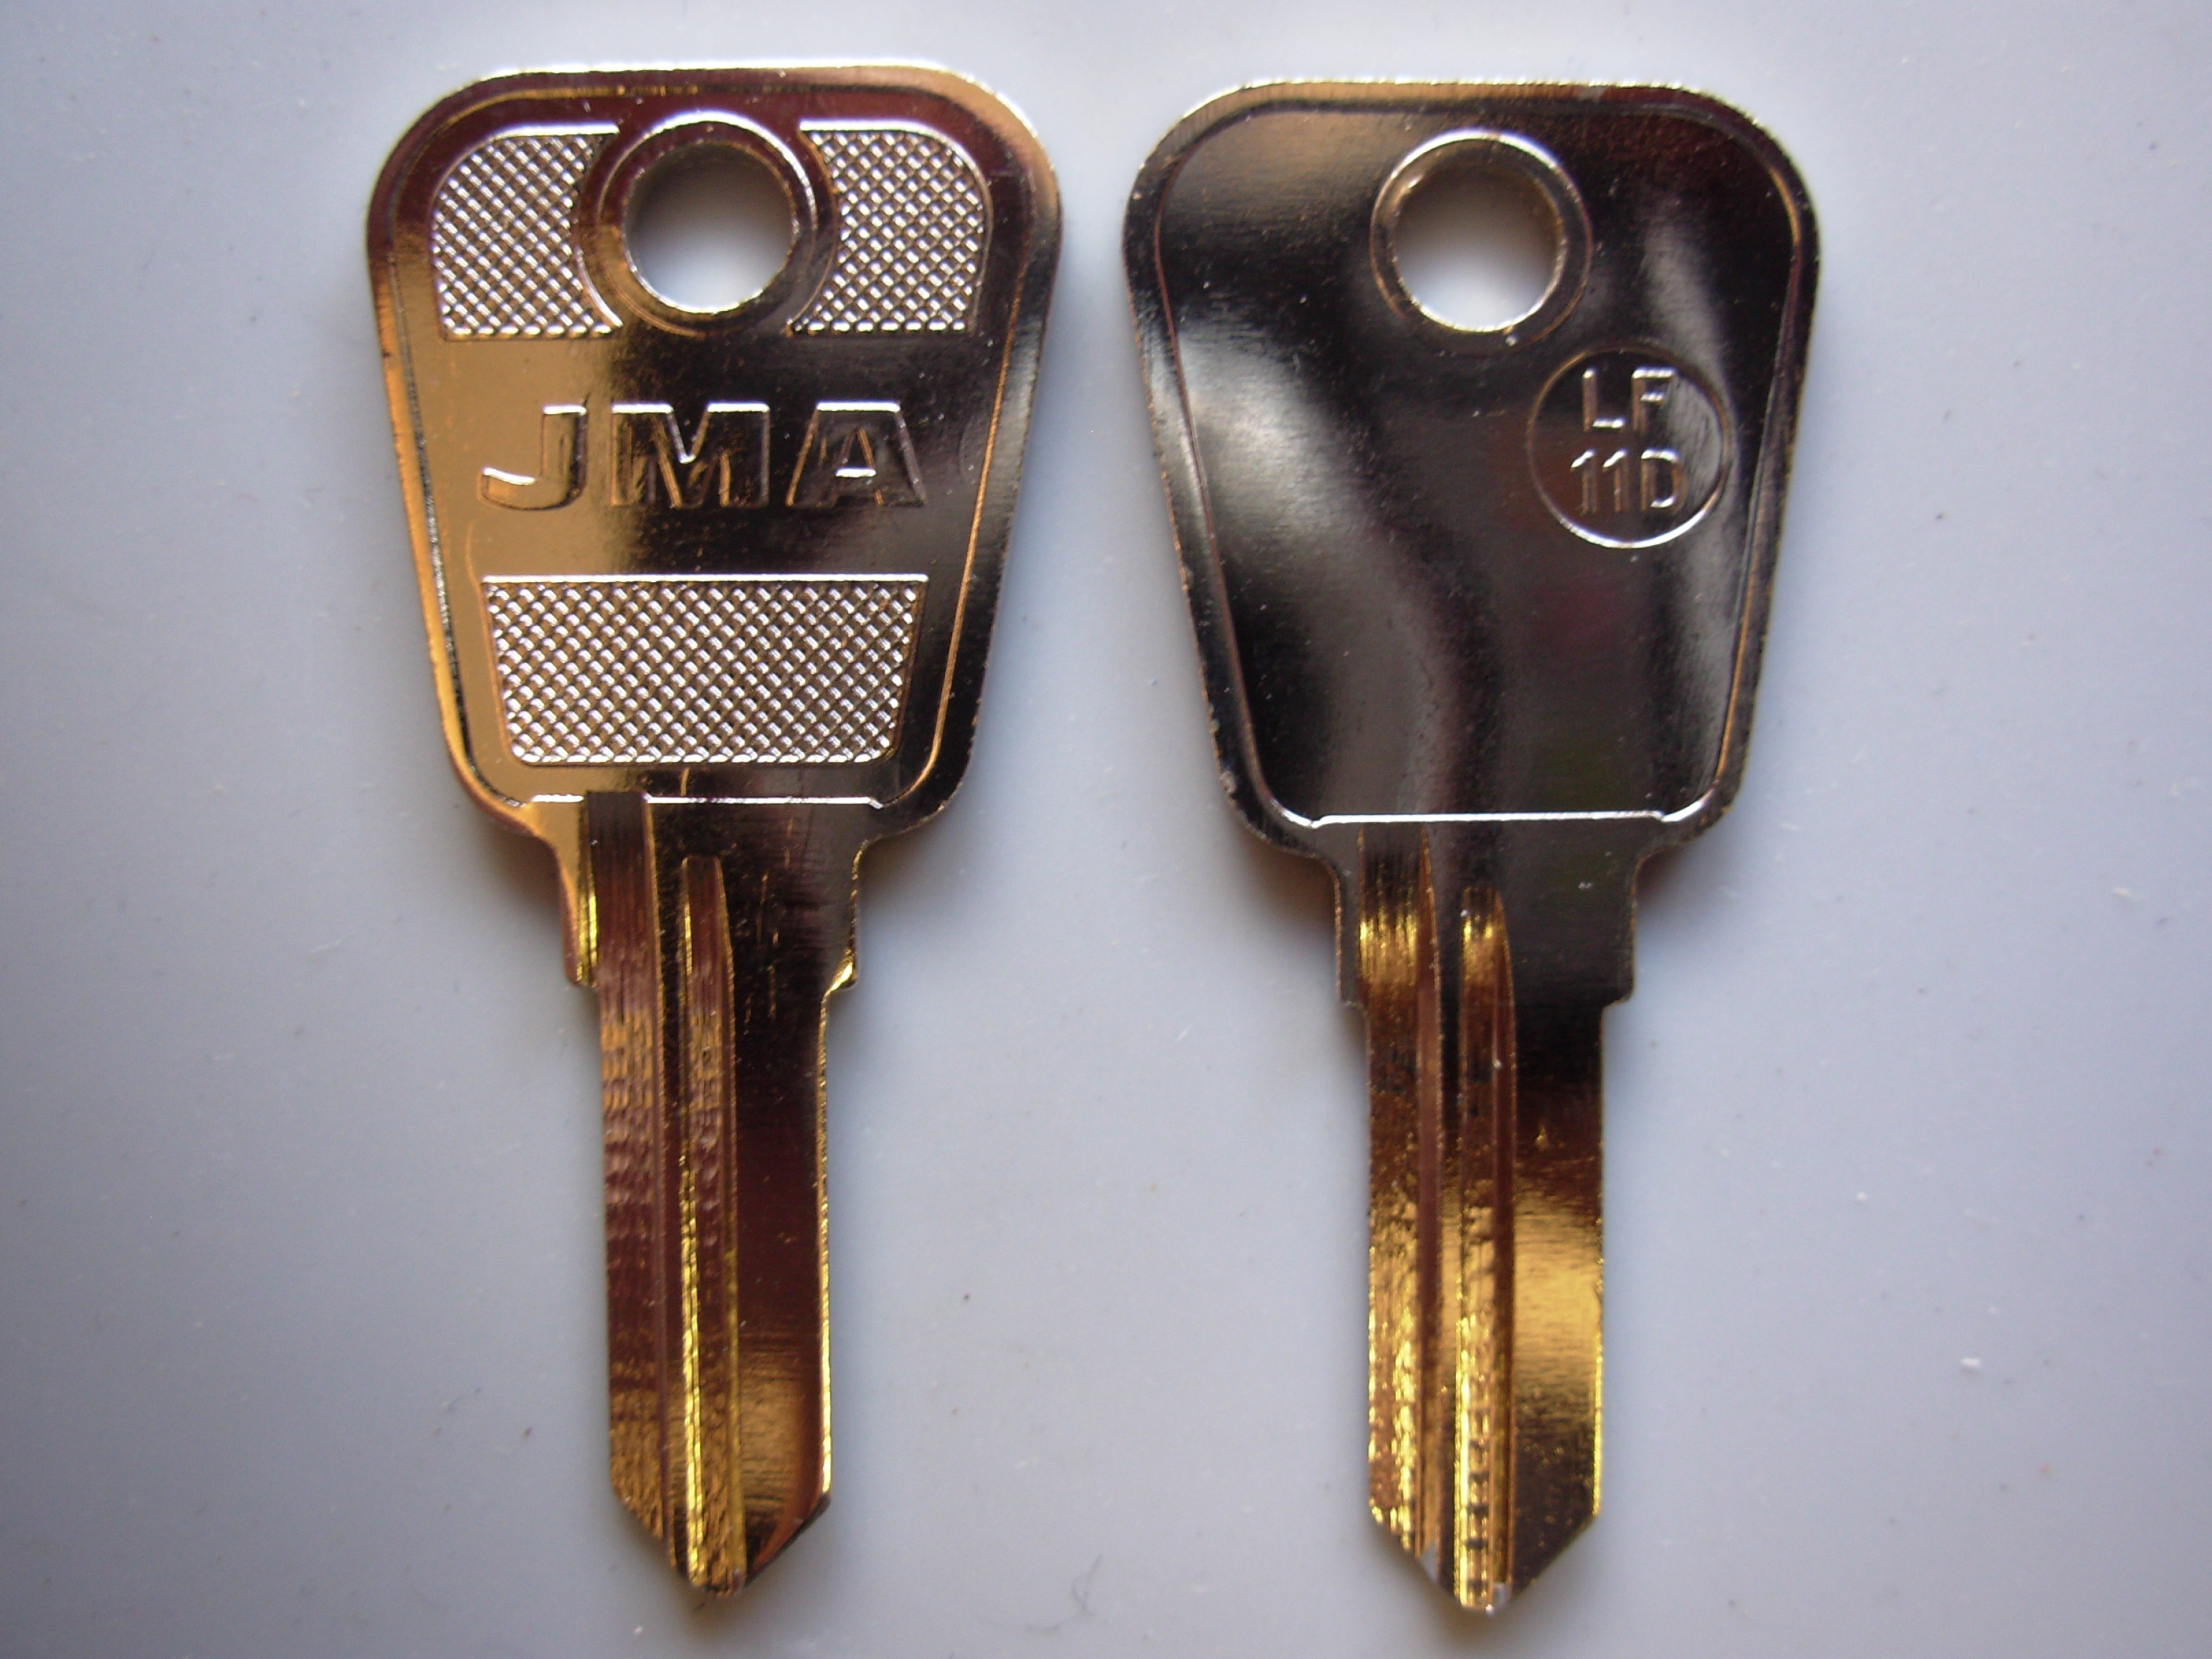 Replacement Cabinet/Locker/Desk Key Cut to Code 64001-65000 BISLEY L&F Switches 